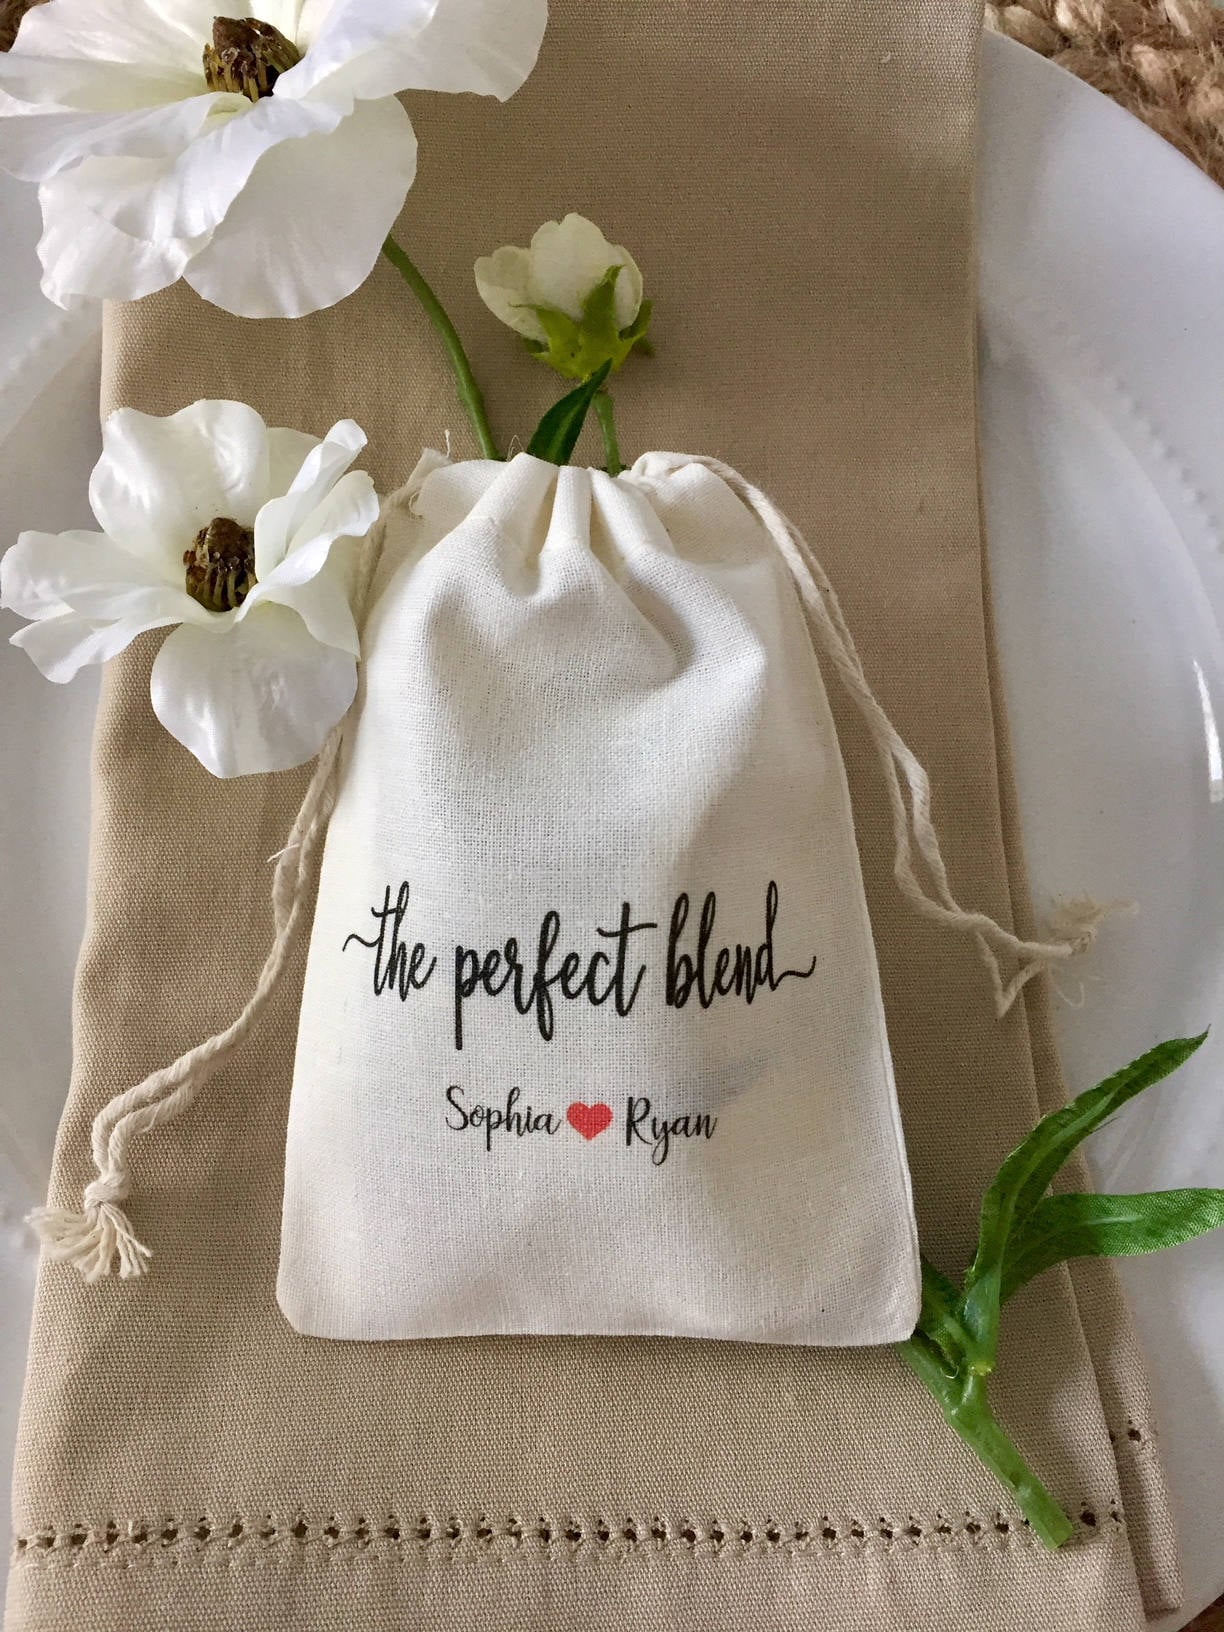 Fun, unique and simple wedding giveaways!, by Just Because